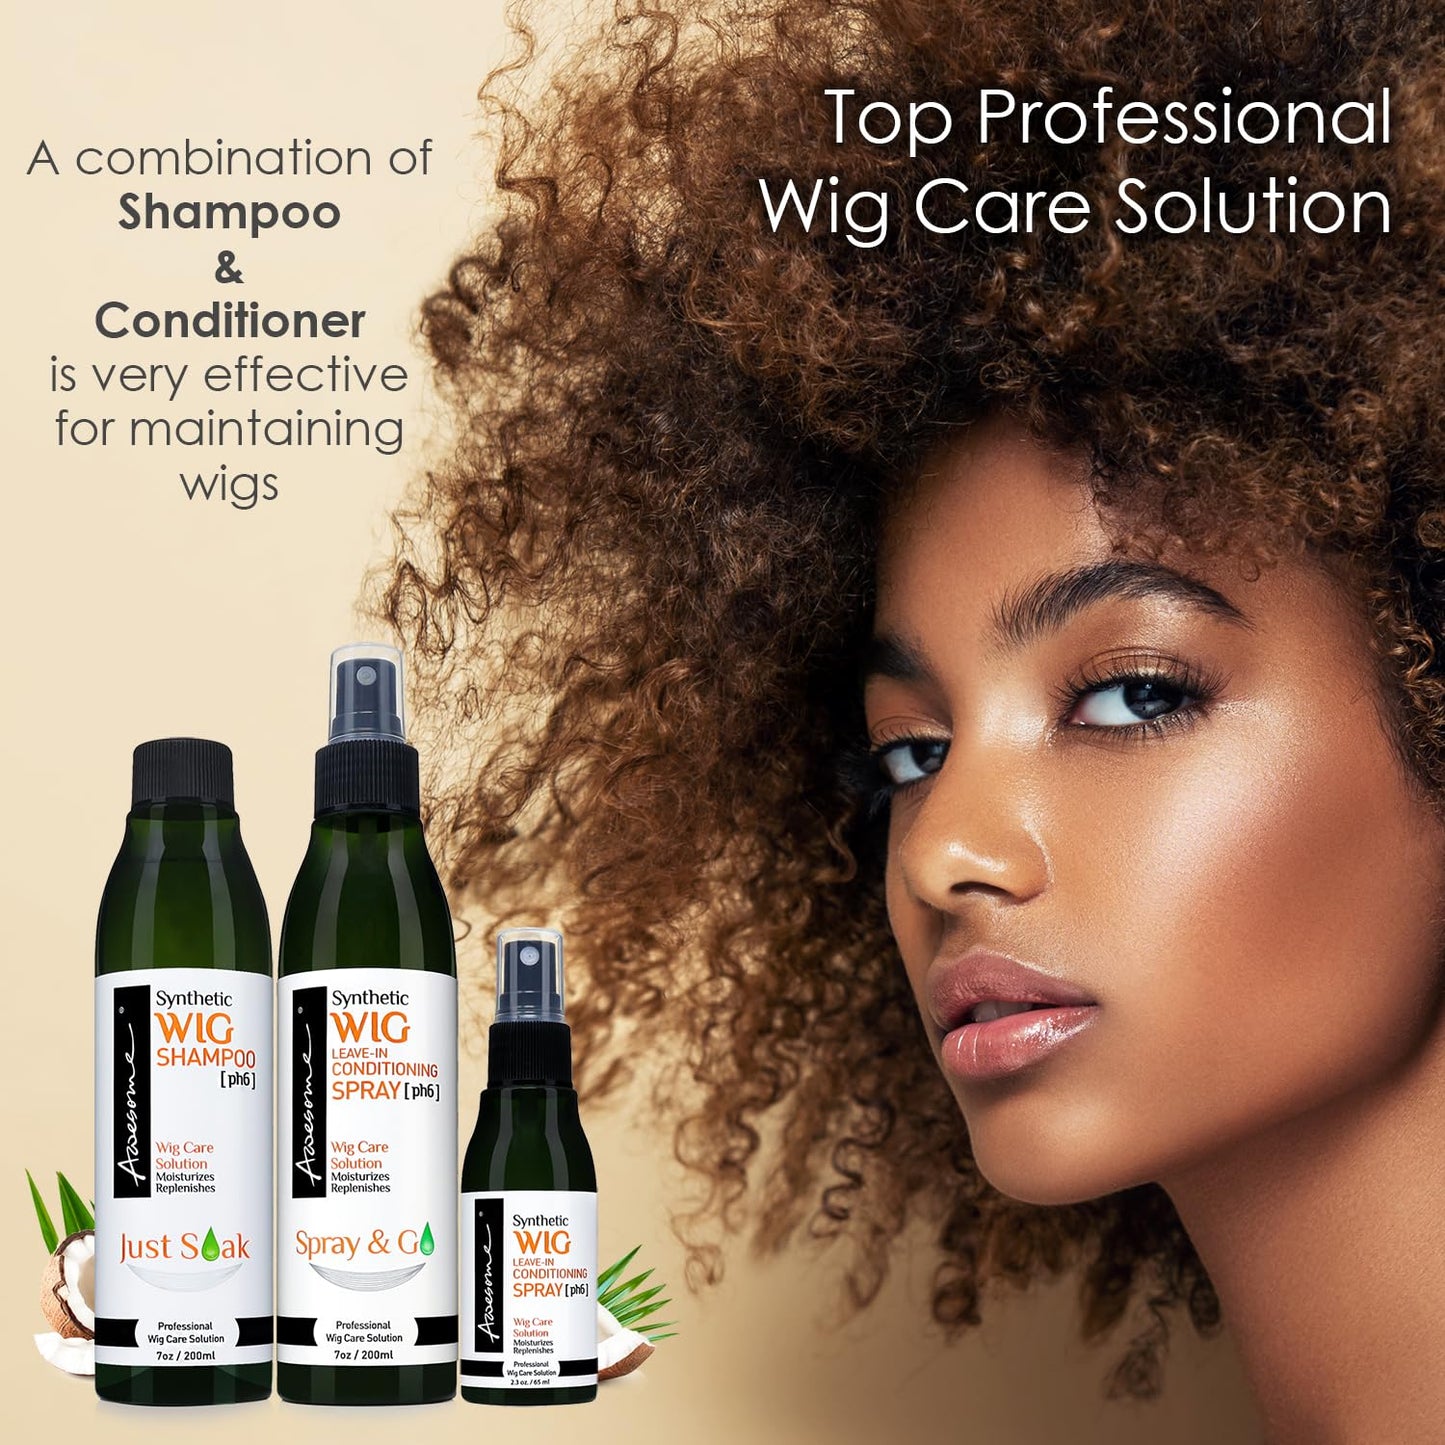 Synthetic Wig Shampoo & Leave in Conditioner Spray